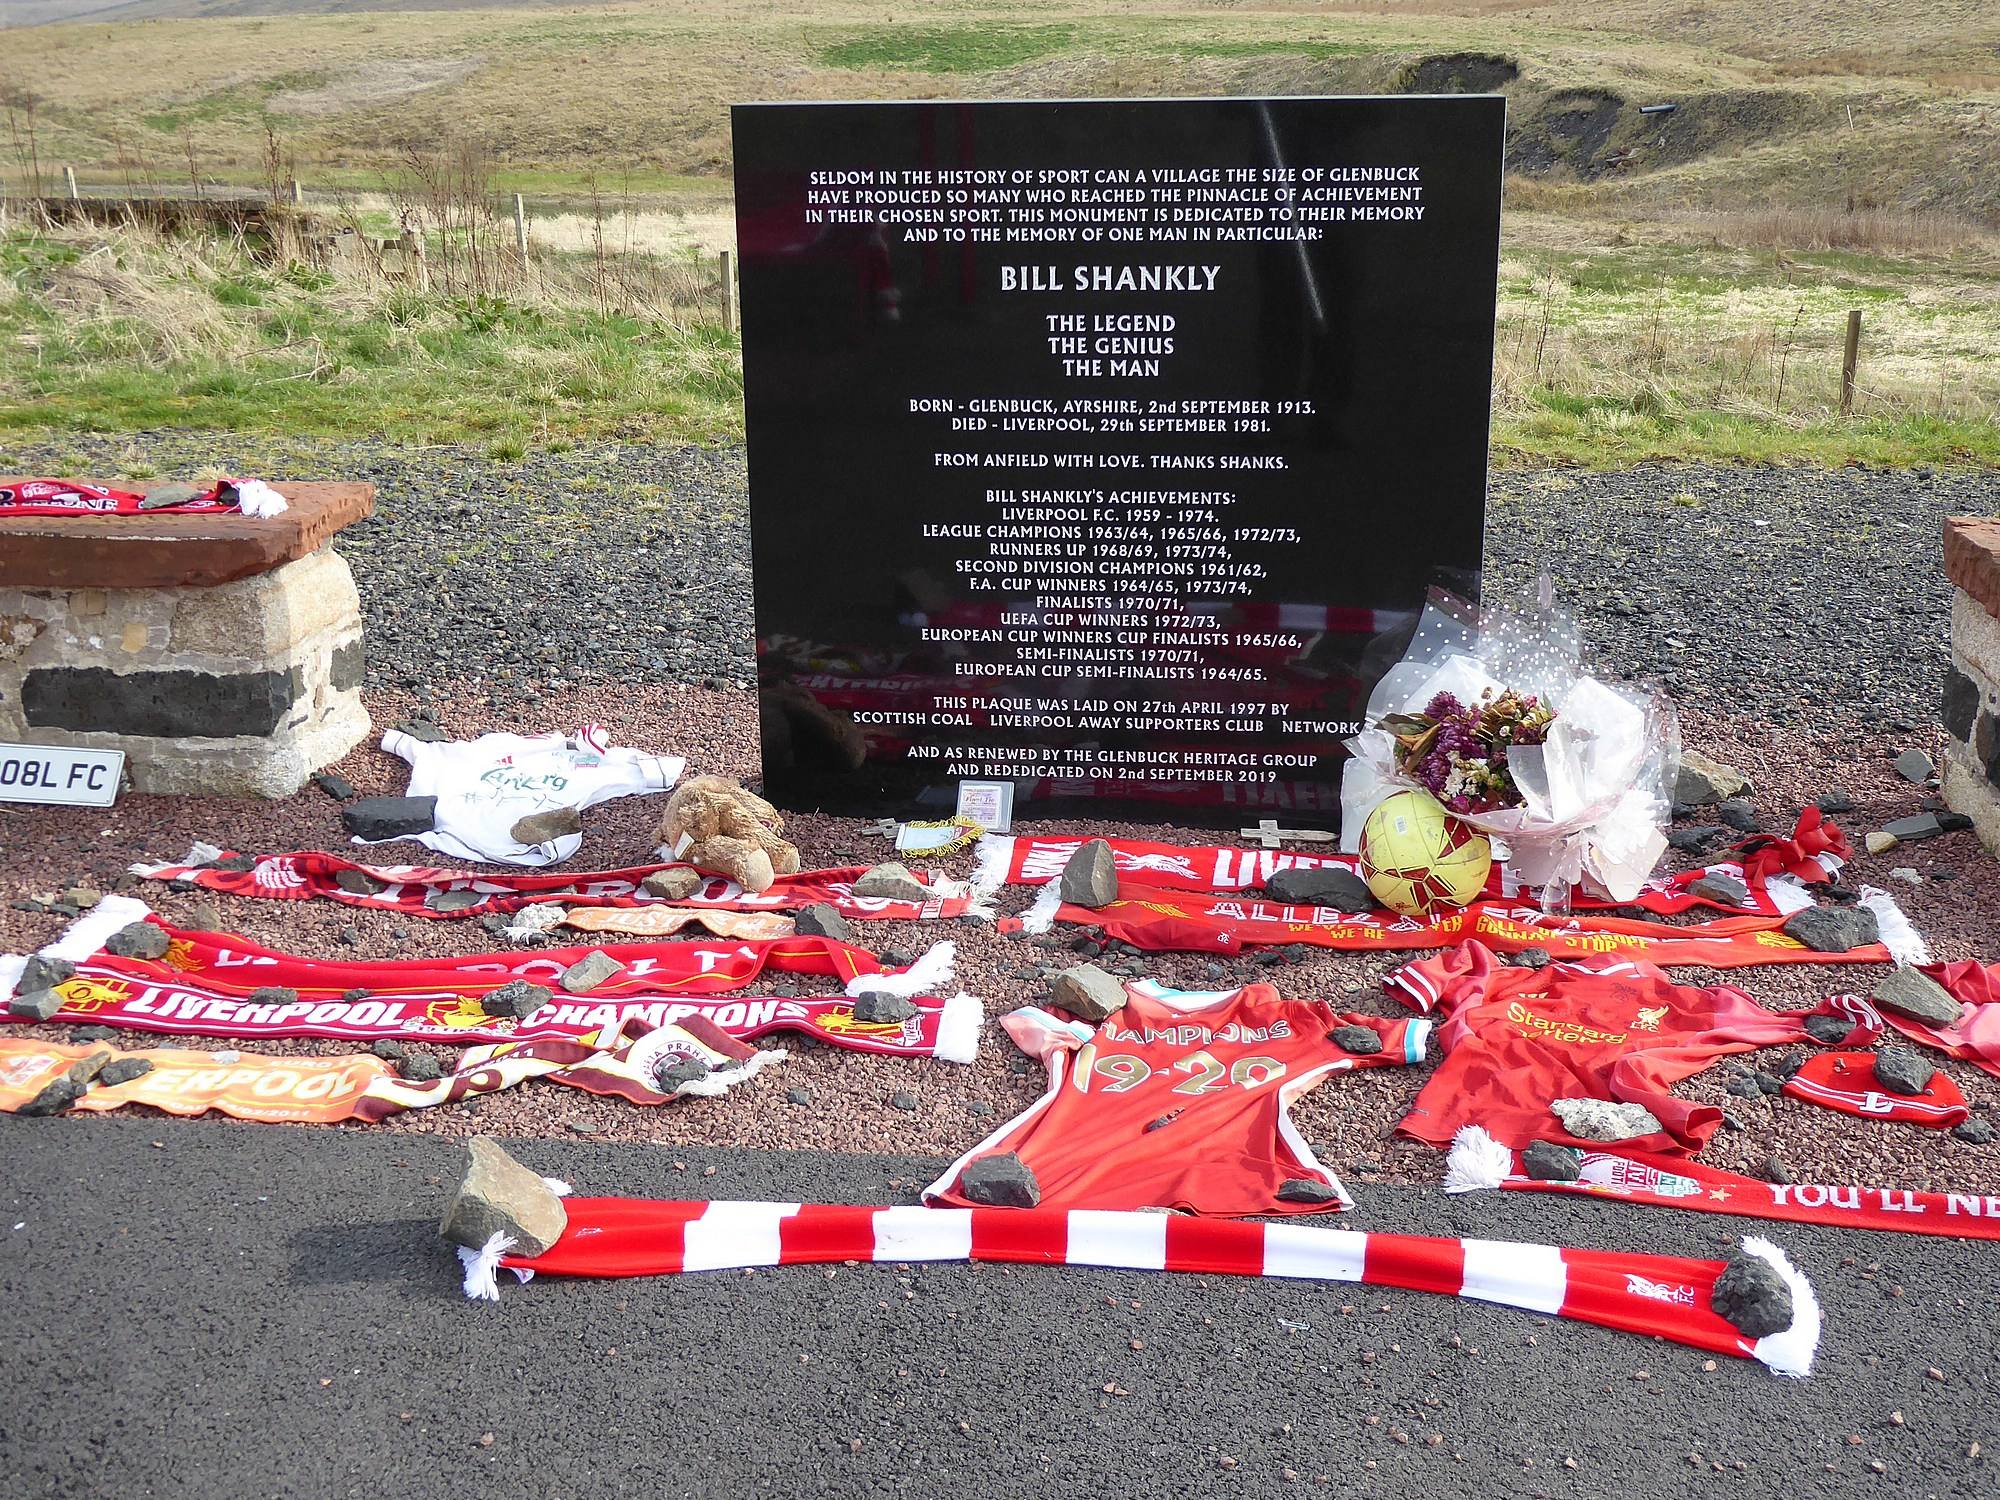 Bill Shankly Memorial, Glenbuck Heritage Village on the location of the Shankly family house.